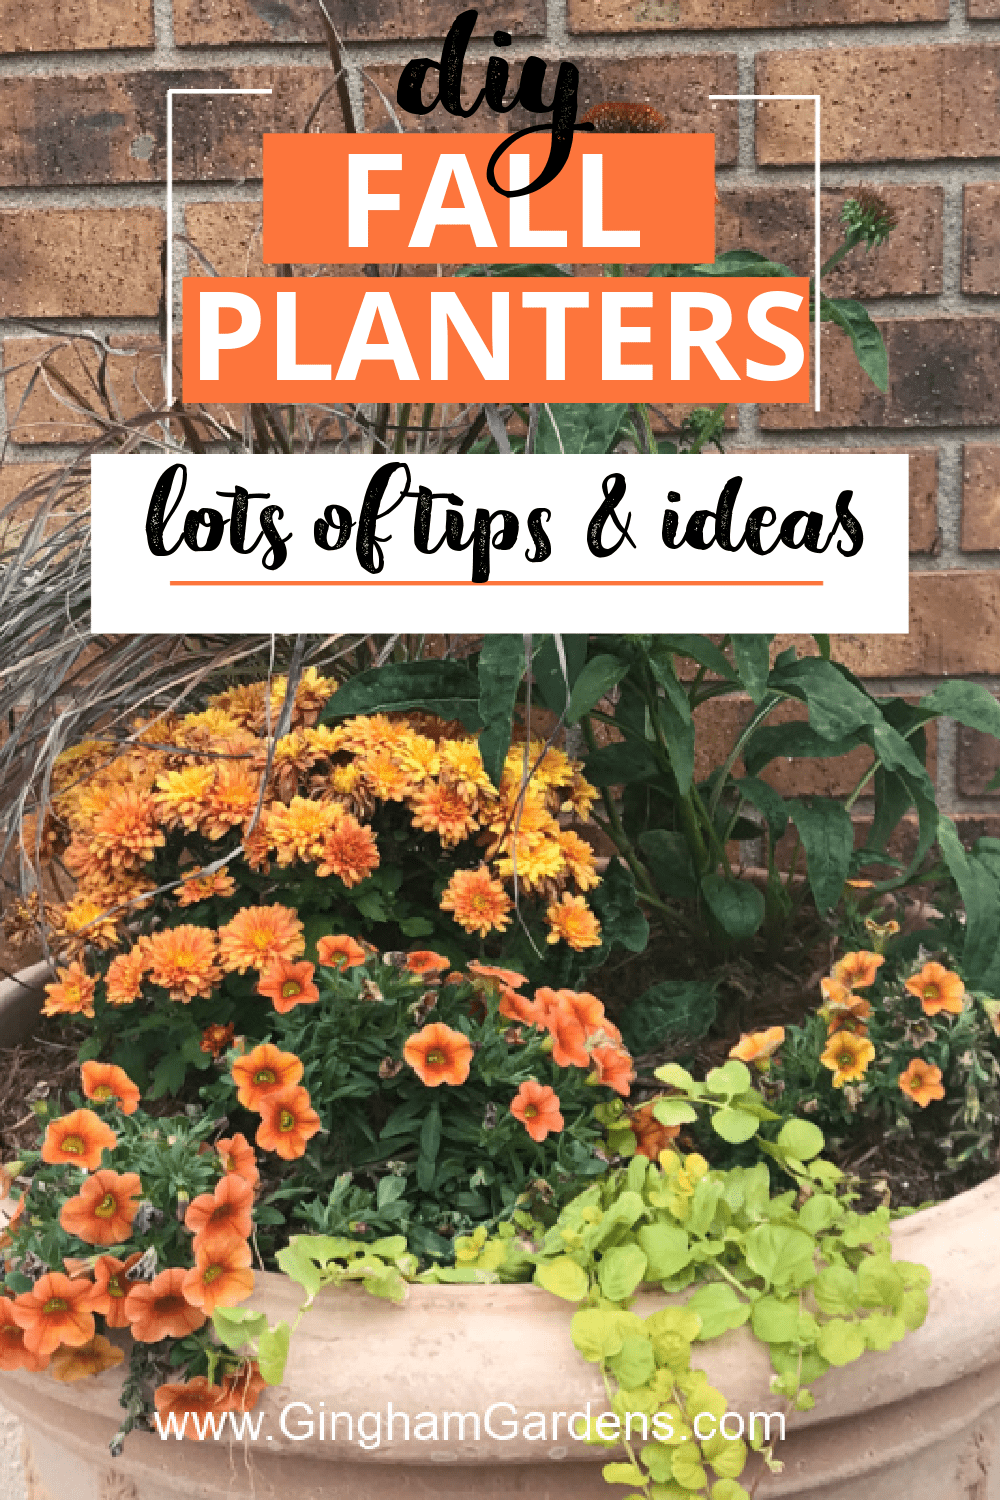 Image of a fall flower planter with text overlay - DIY Fall Flower Planters lots of tips and ideas